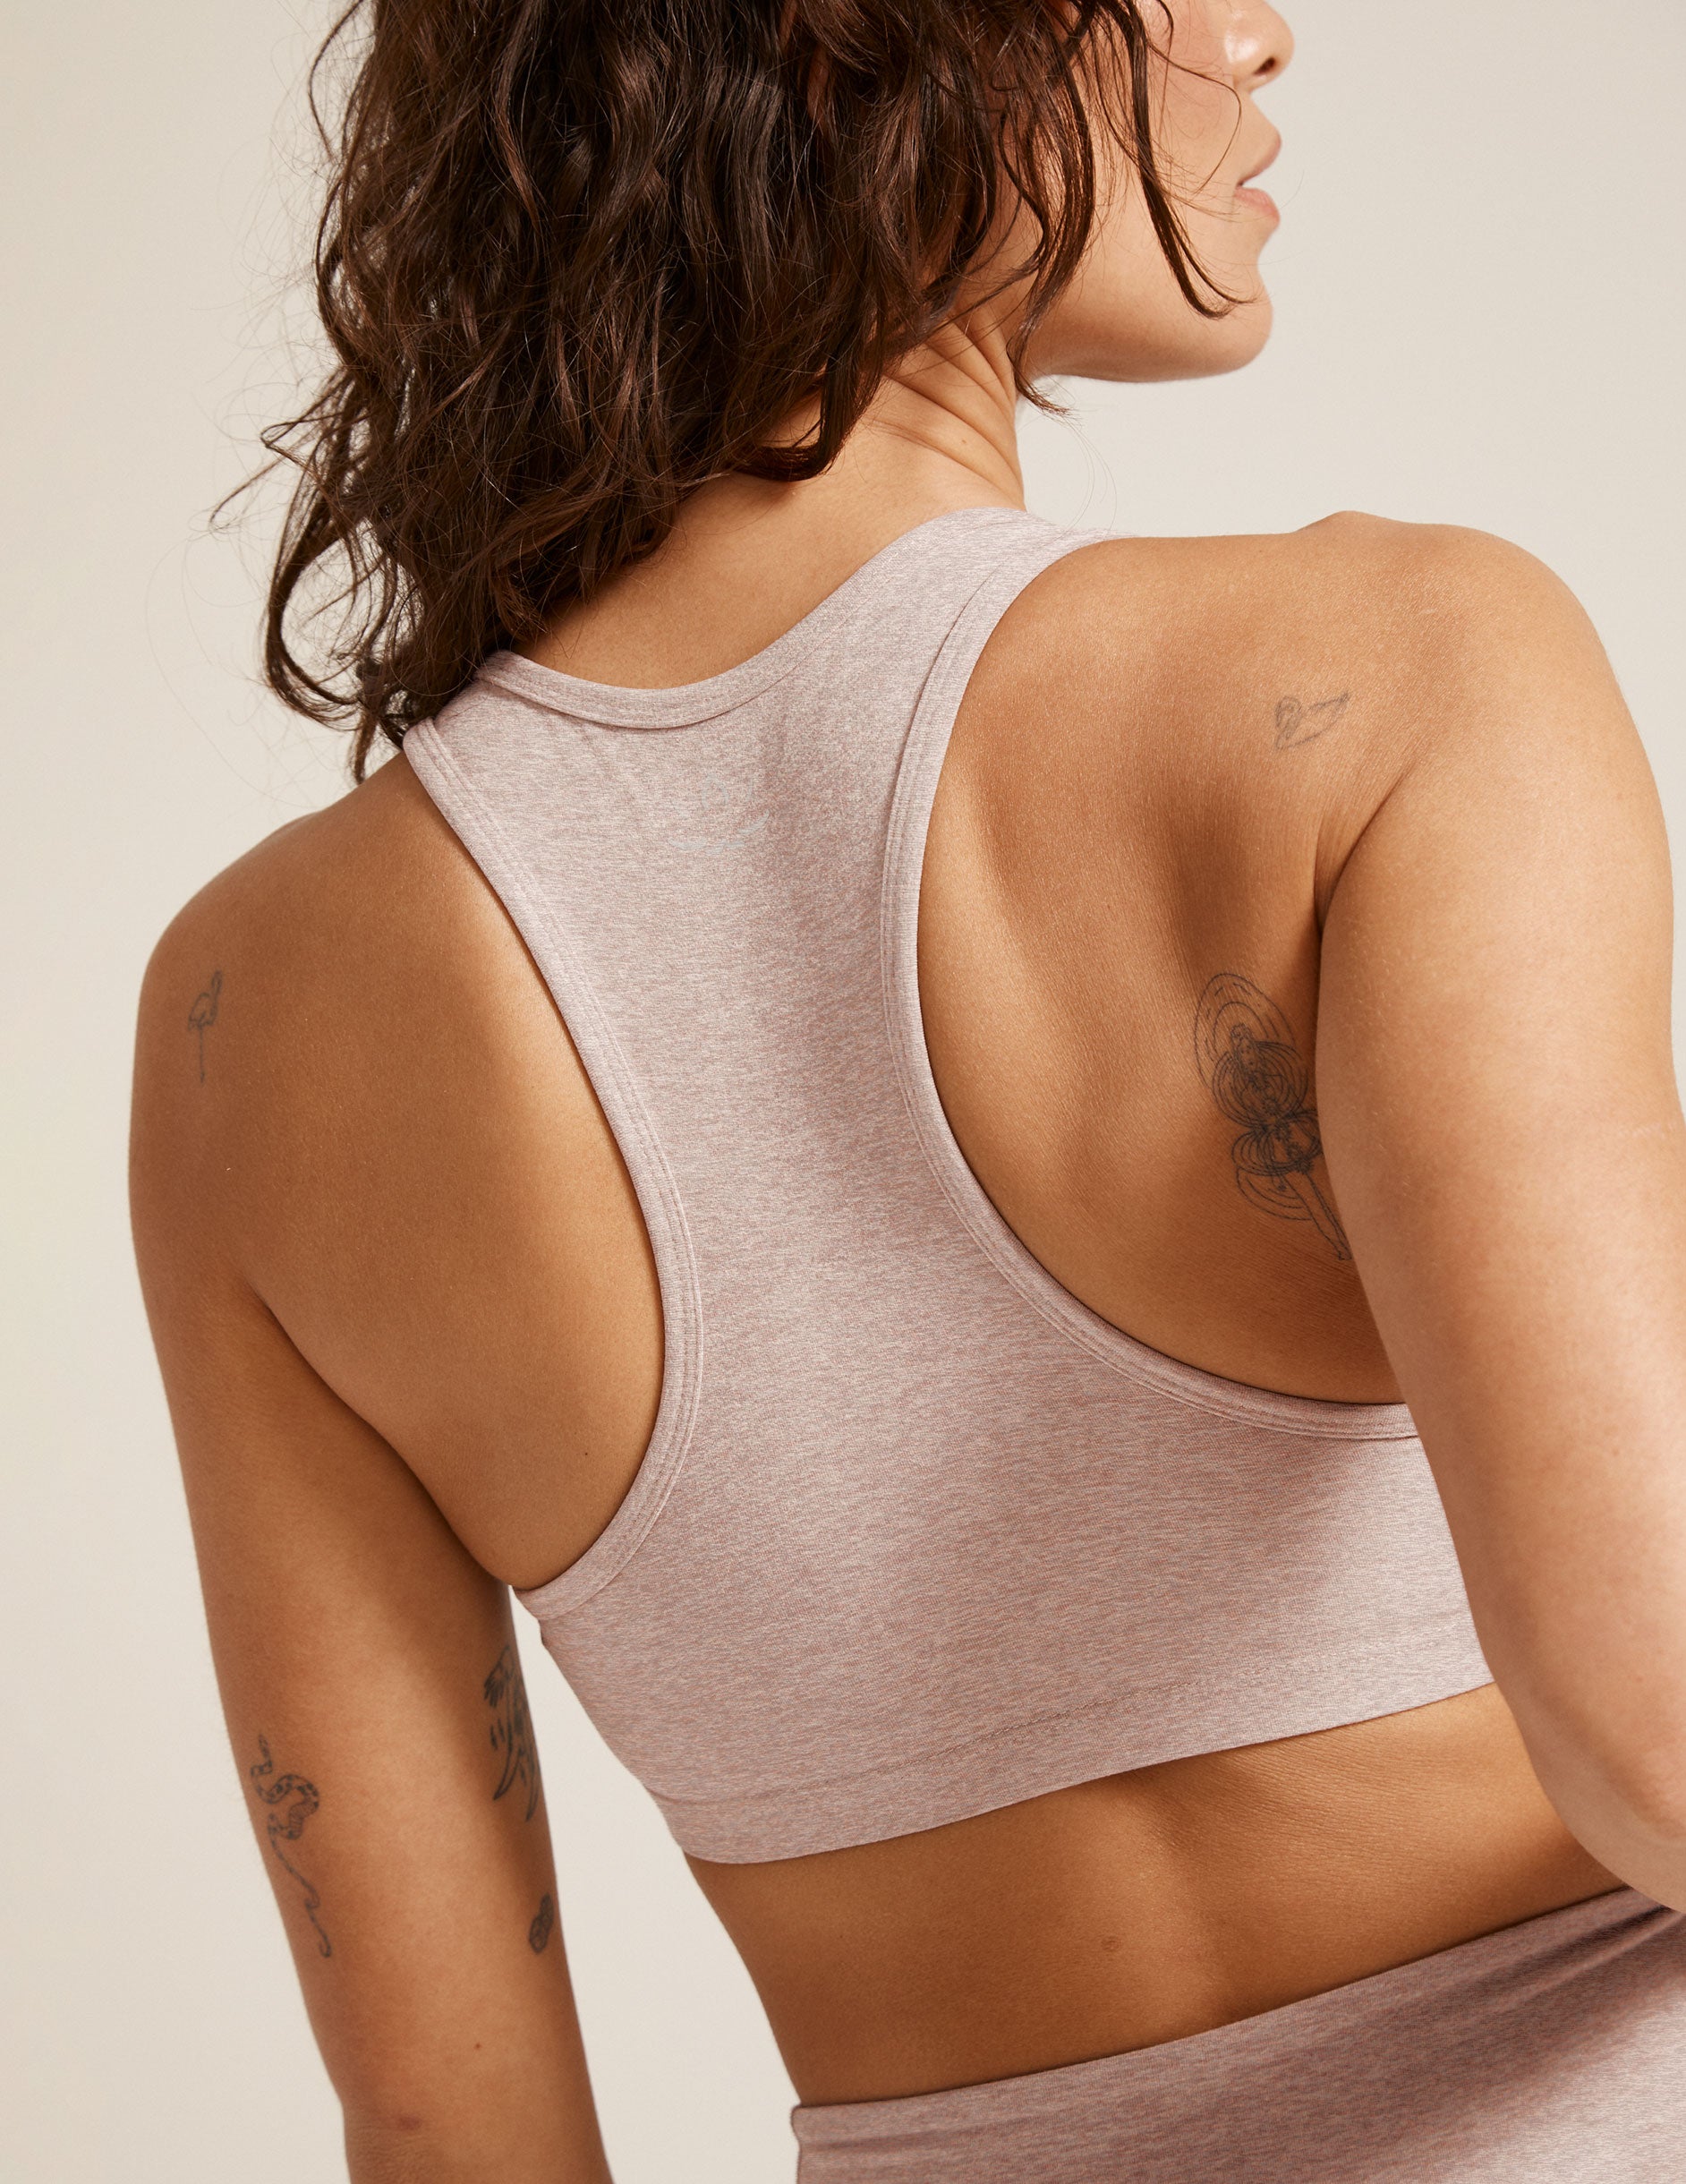 Size med Nike sport bra fits small IMO.